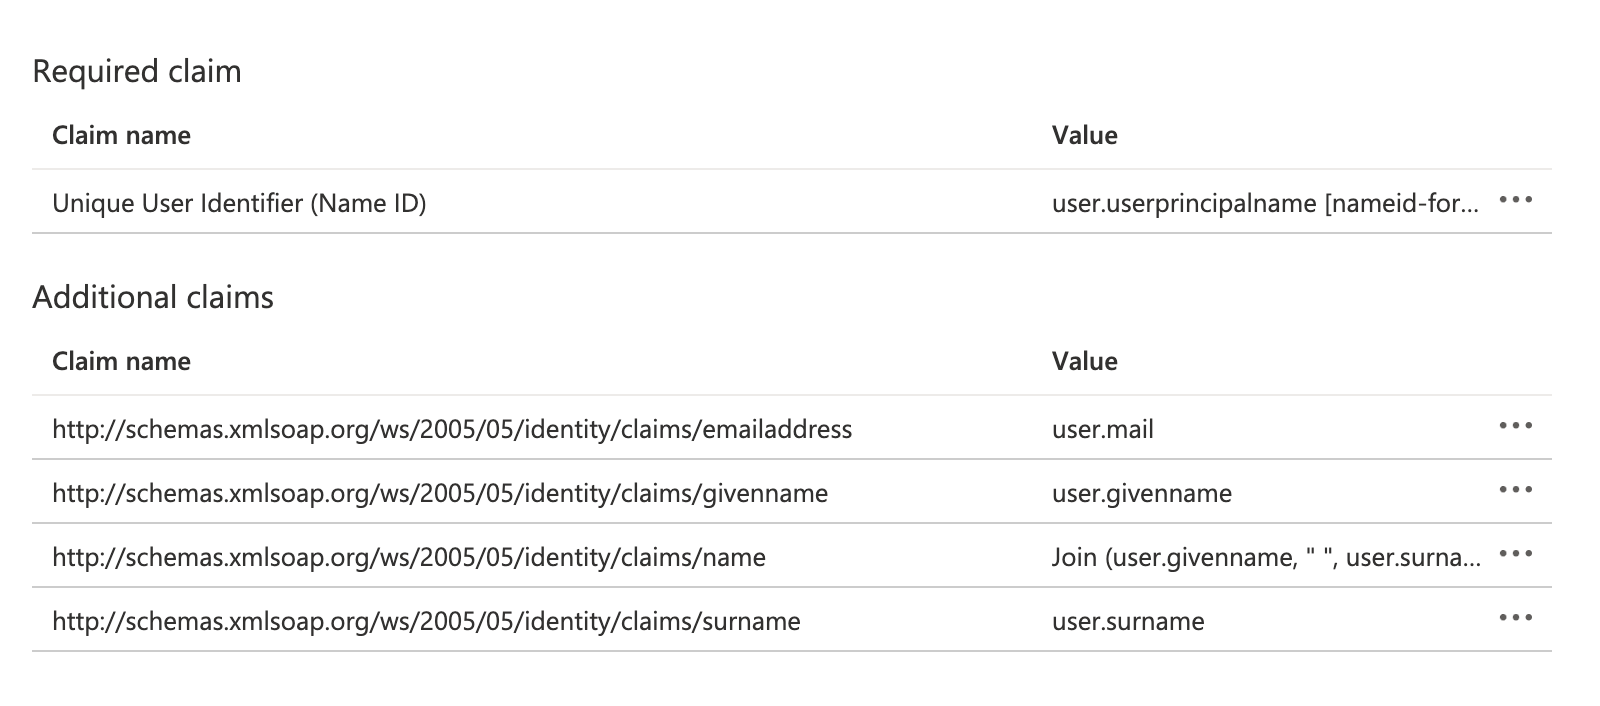 Azure required claims and values